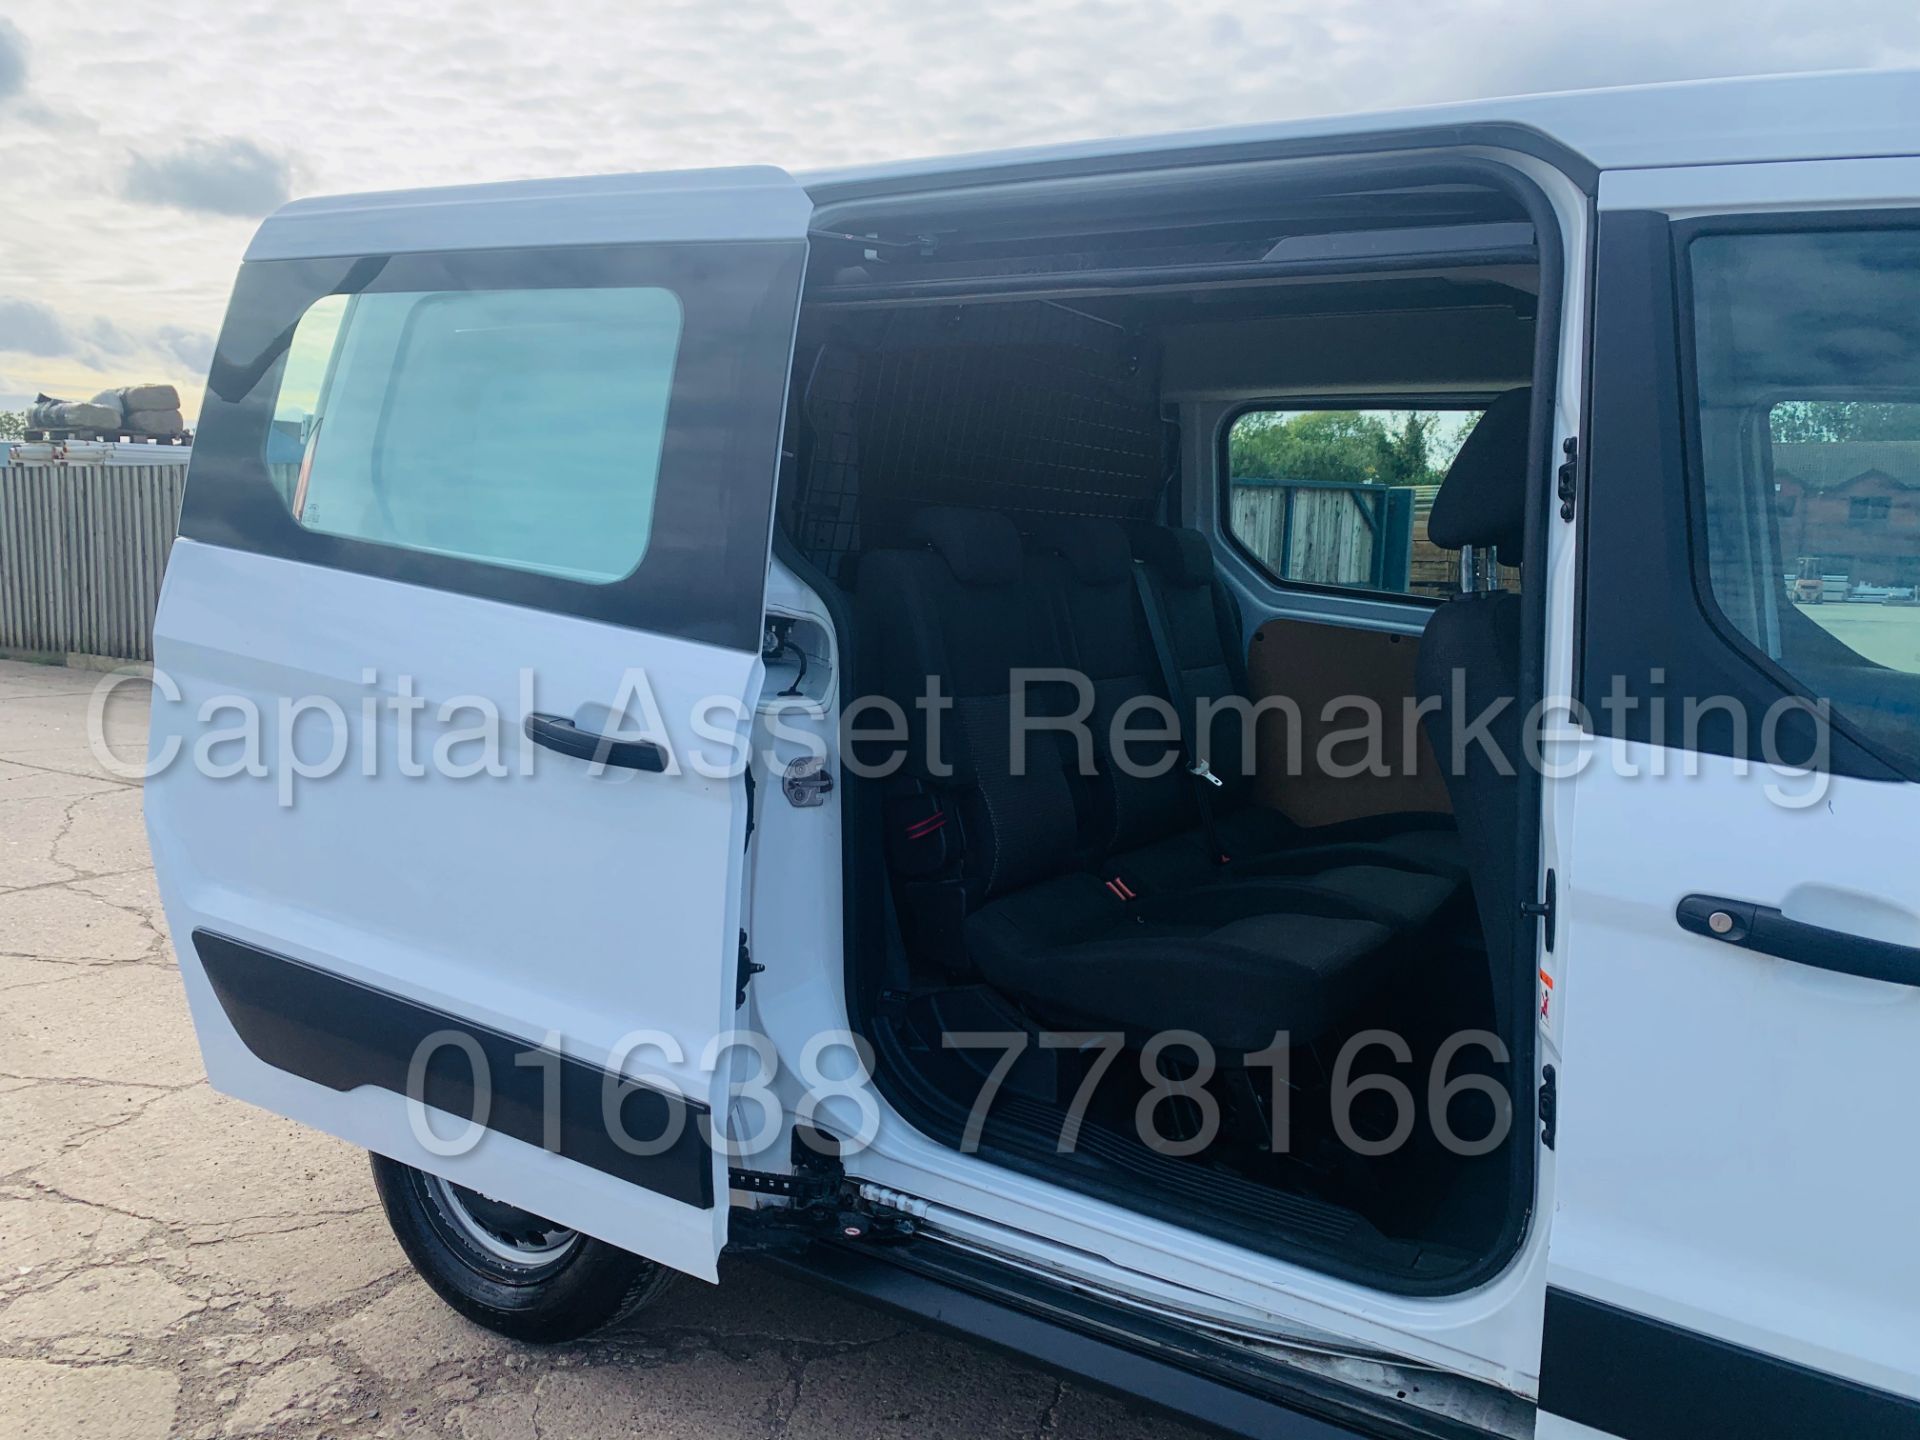 (On Sale) FORD TRANSIT CONNECT *LWB - 5 SEATER CREW VAN* (67 REG - EURO 6) 1.5 TDCI *A/C* (1 OWNER) - Image 24 of 40